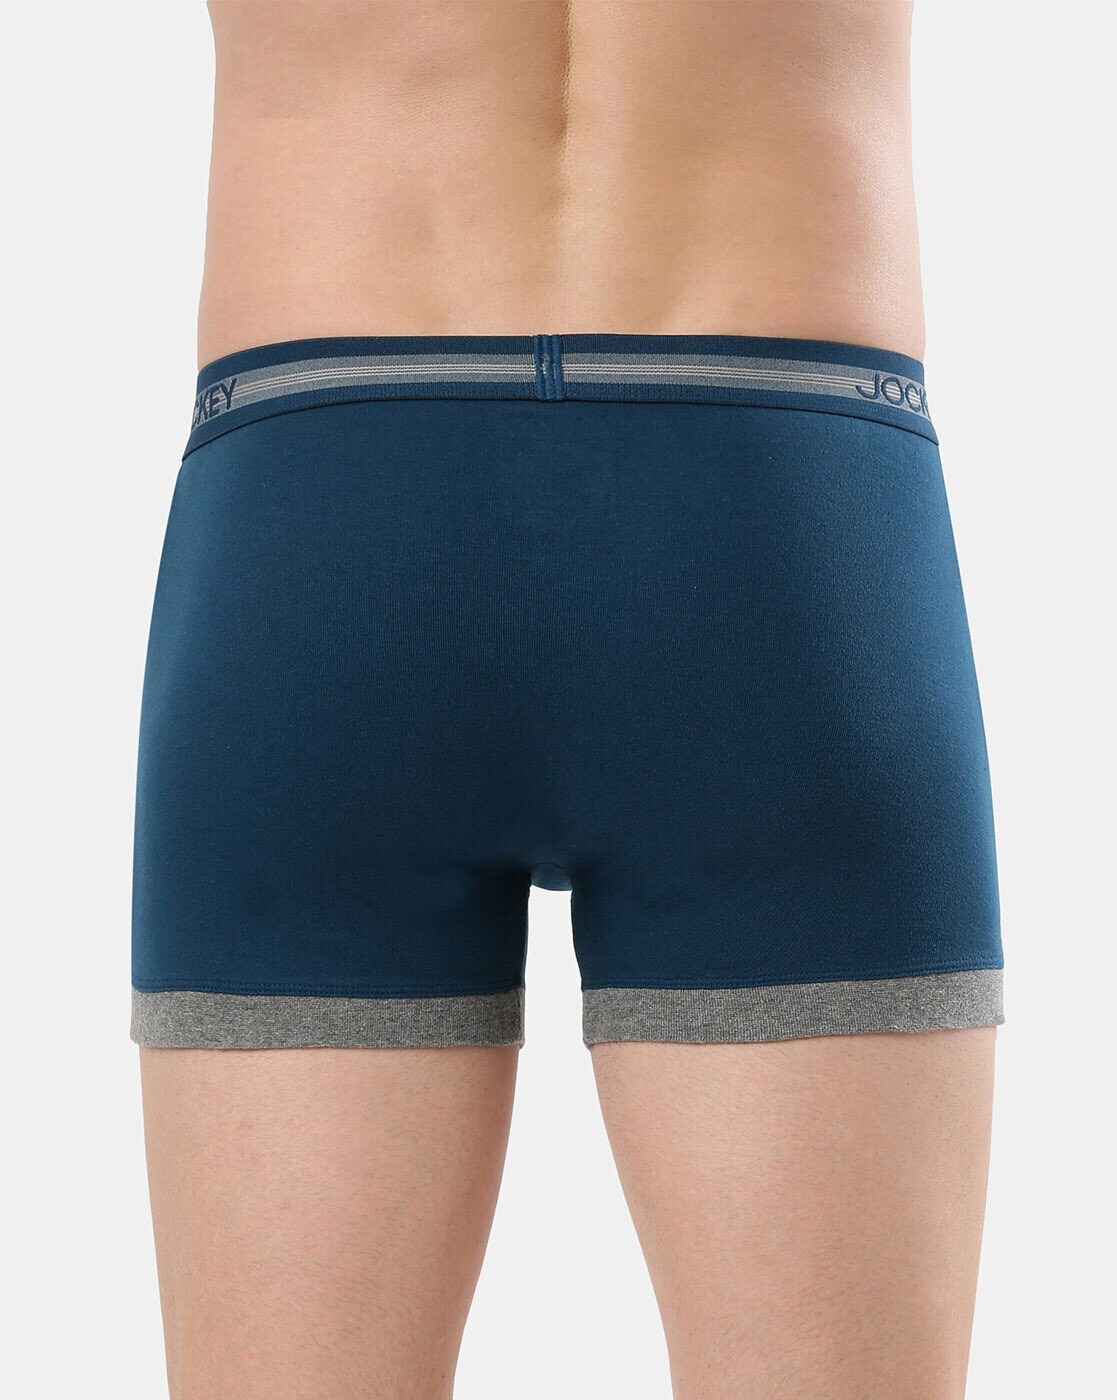 Hurley 2 Pack Everyday Stretch Boxer Briefs - Men's Boxers in Playa Jaco  Singal Blue